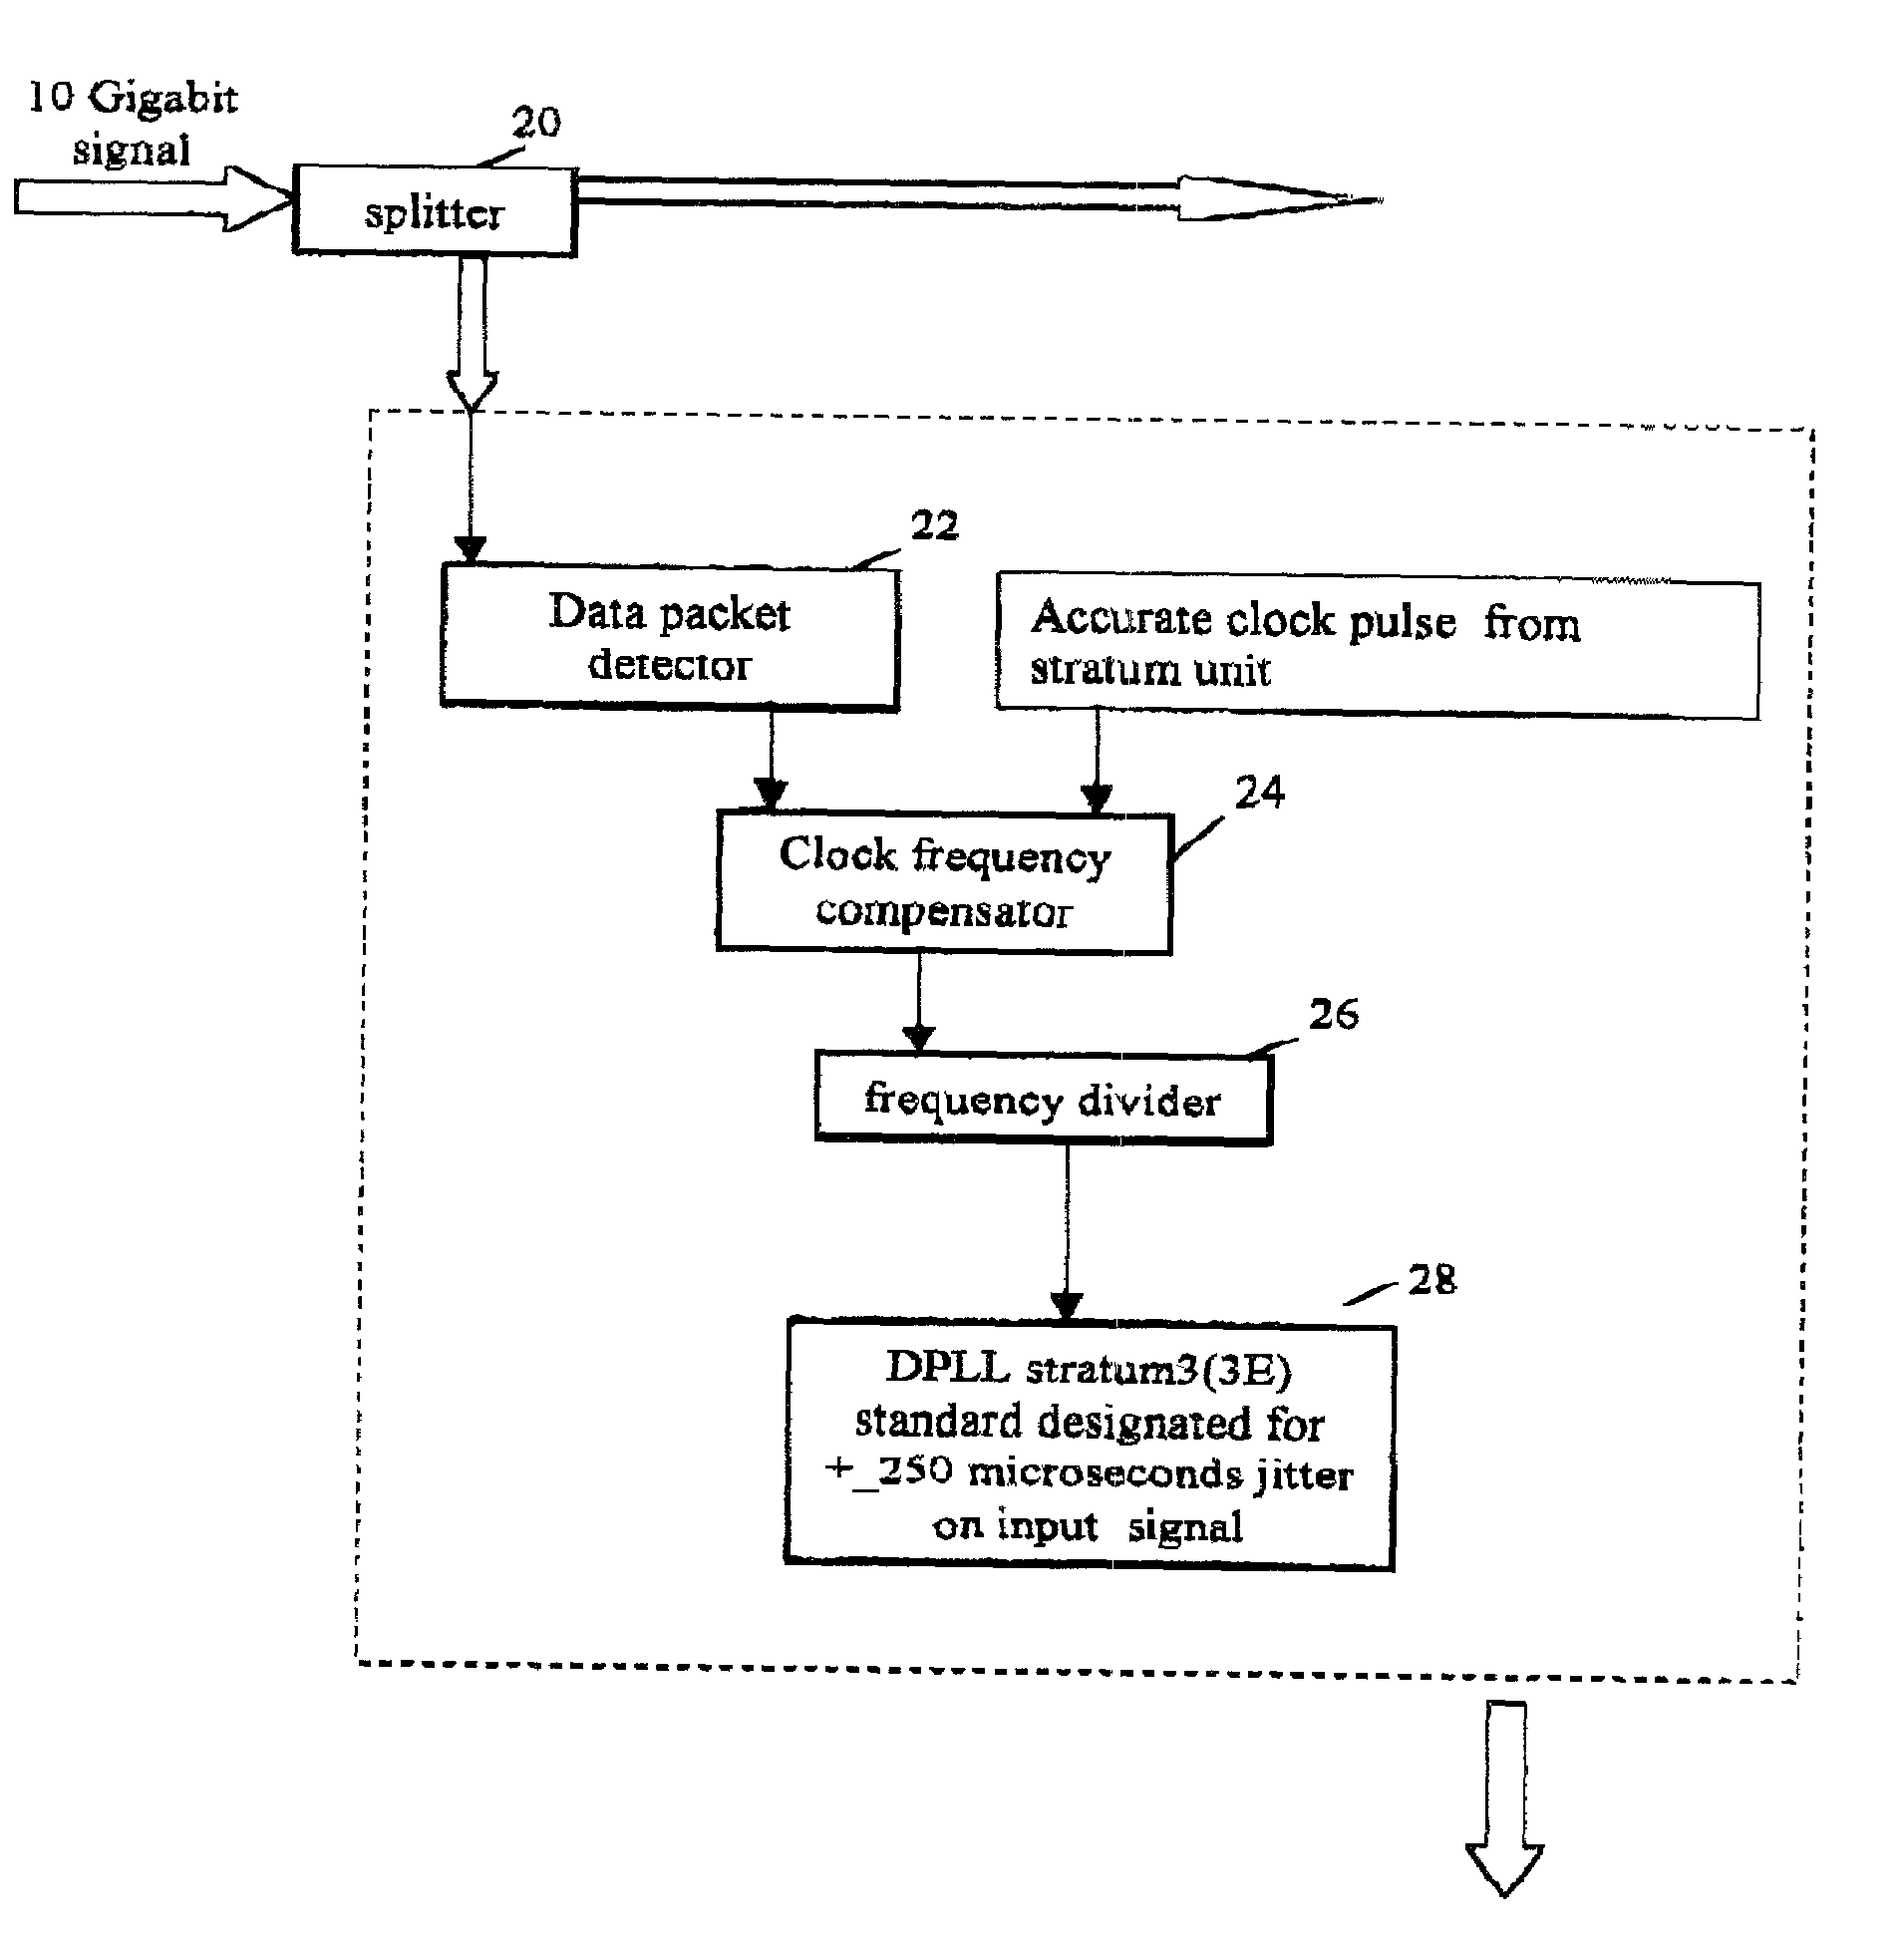 System and method for synchronizing between communication terminals of asynchronous packets networks